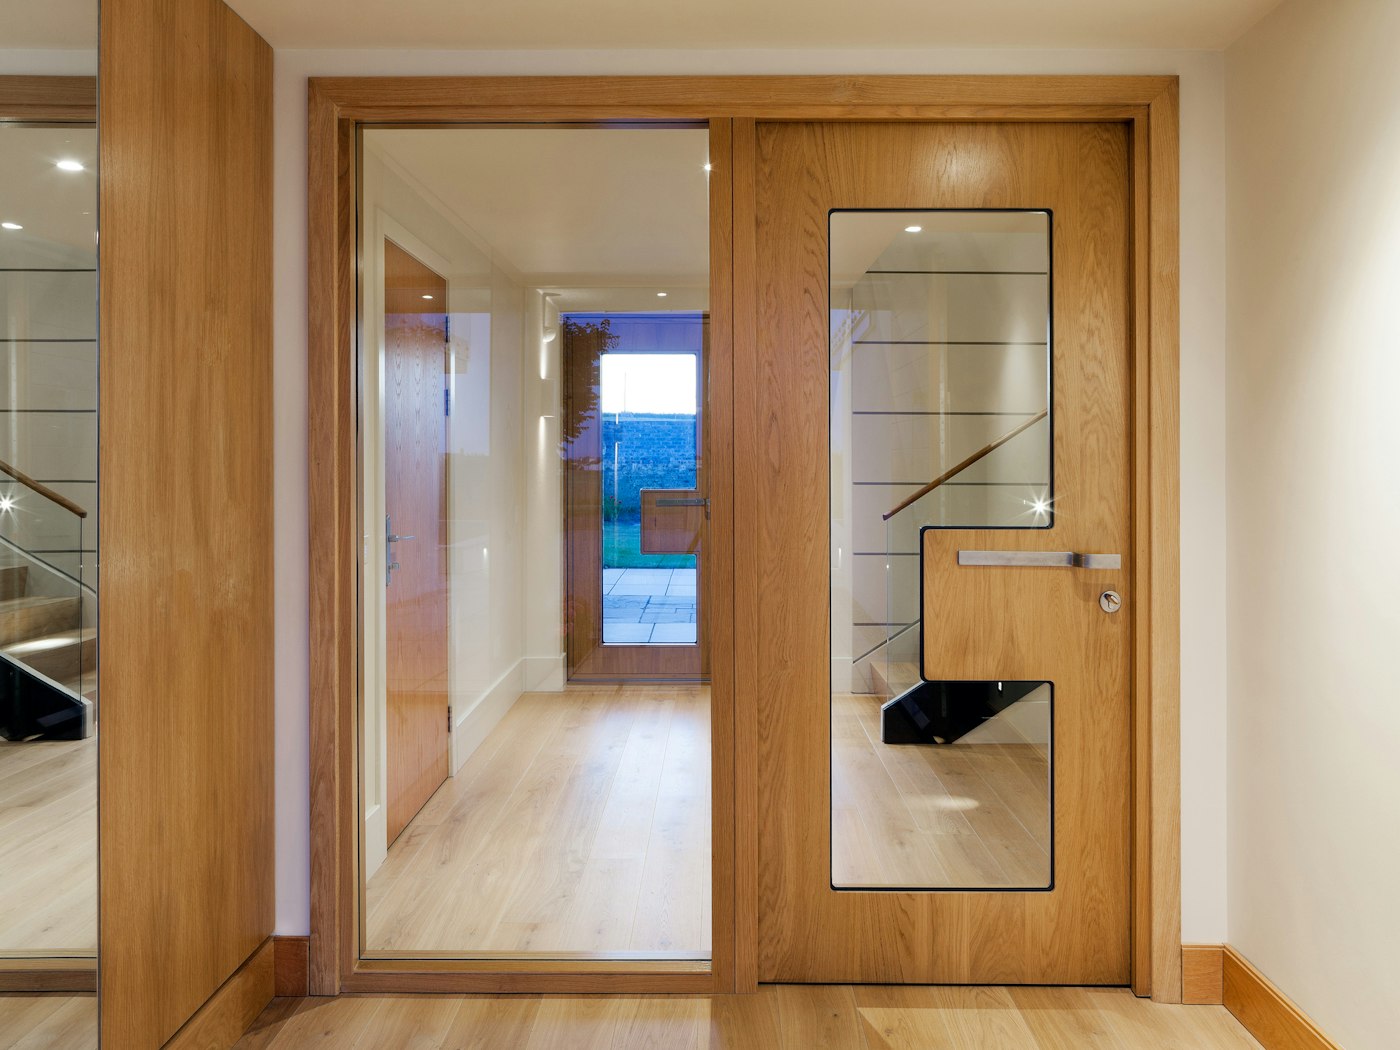 The internal doors are Urban Front's Ice style which also feature glass heavily as part of the design